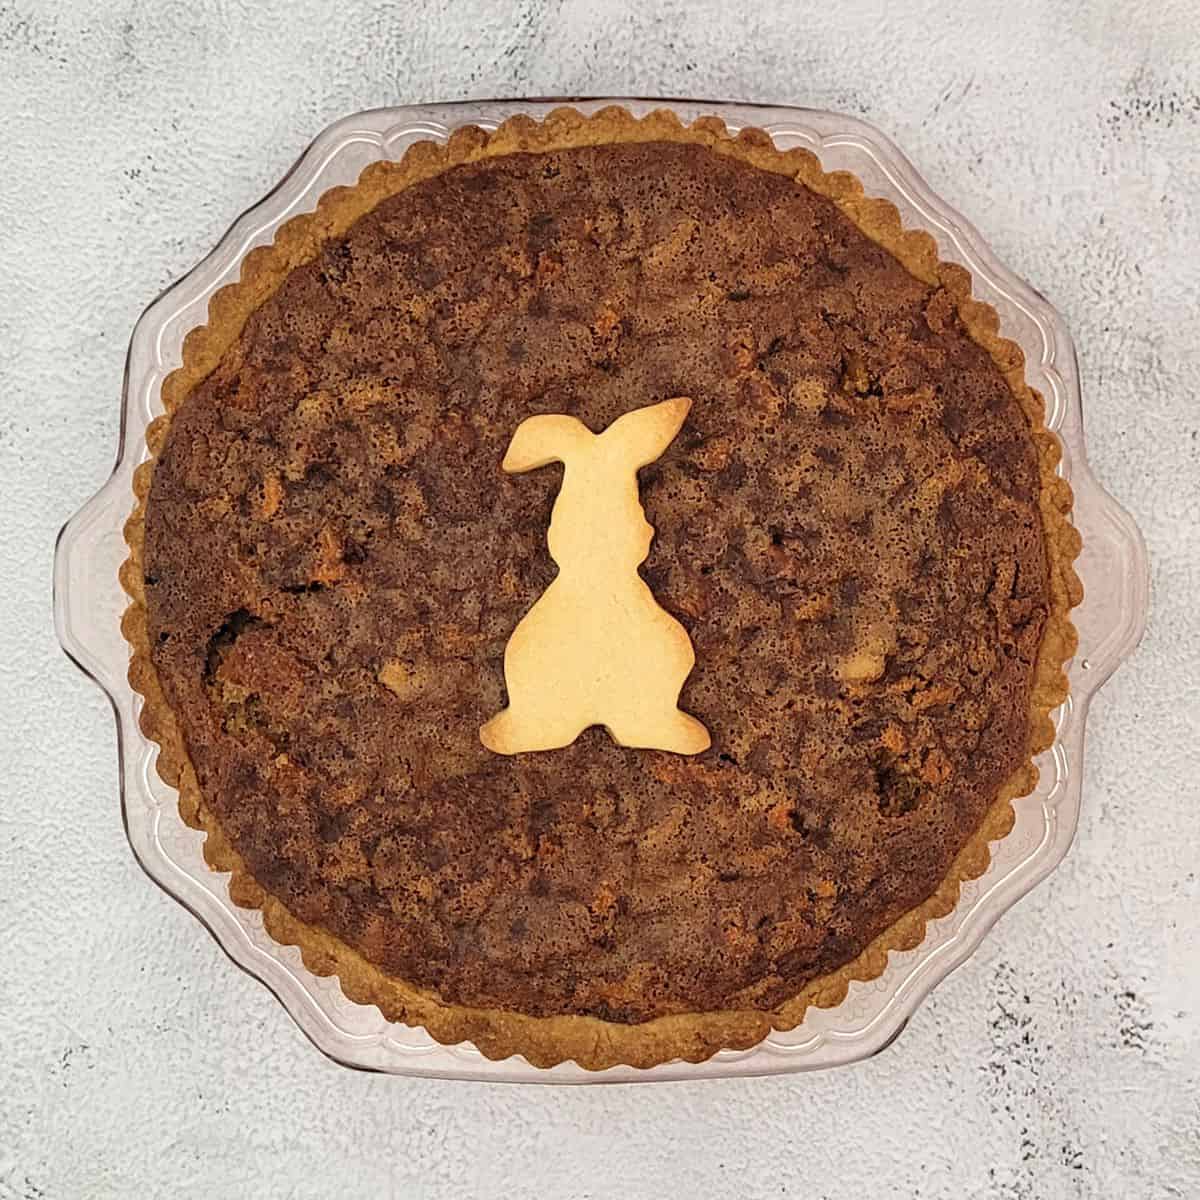 carrot cake pie with an Easter bunny sugar cookie on top for decoration